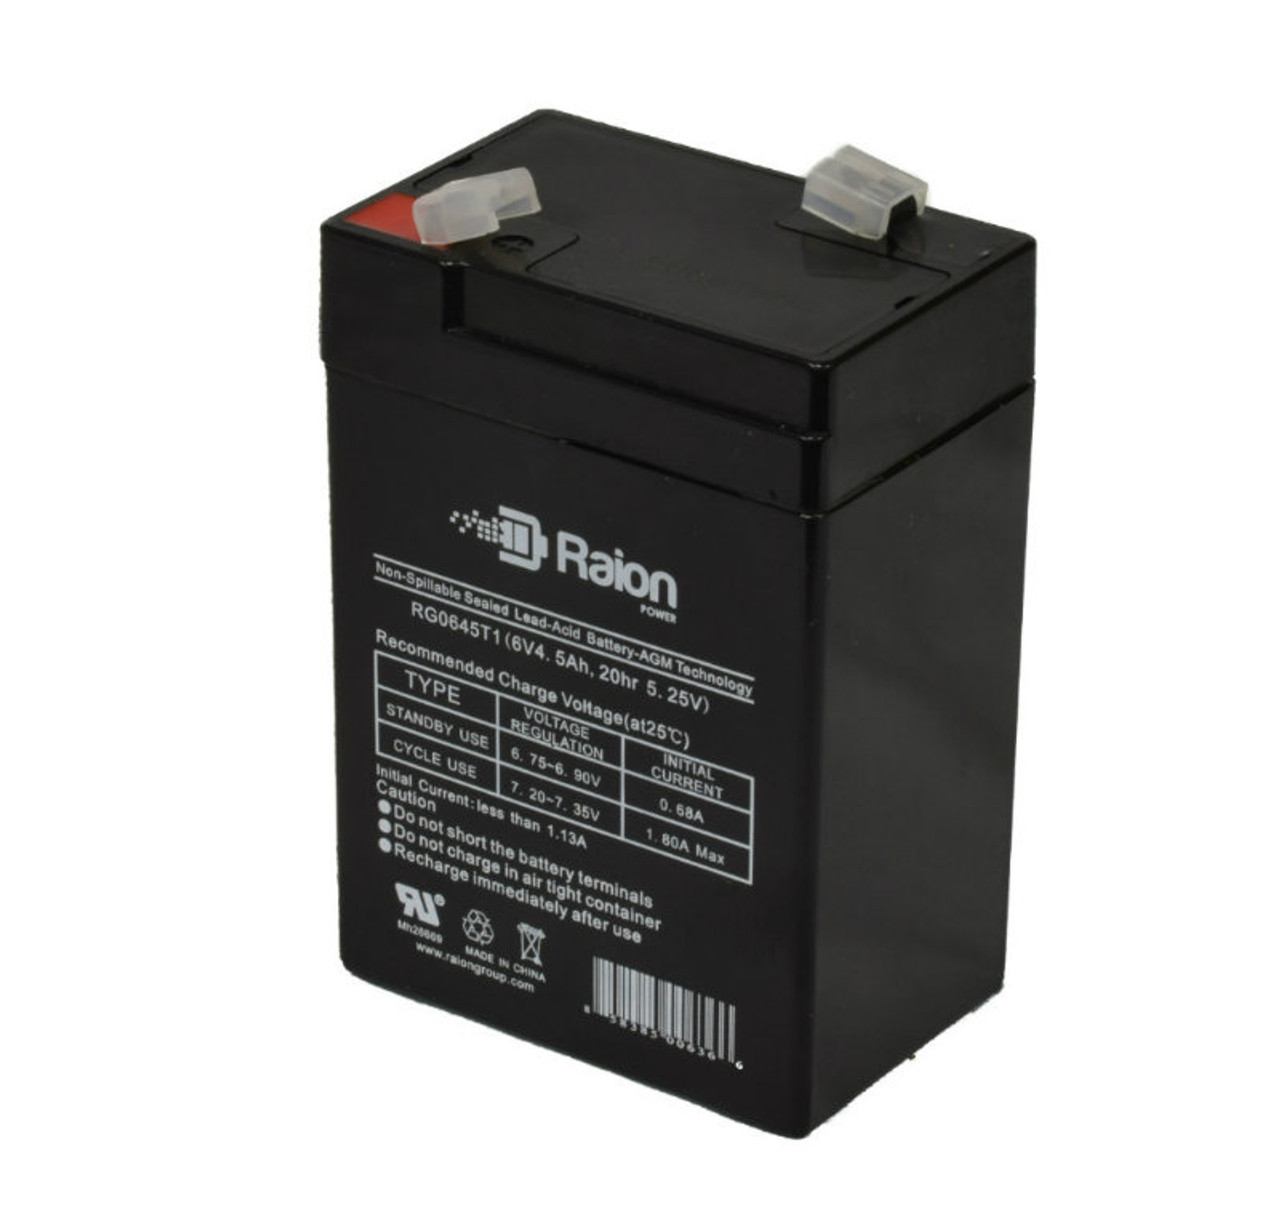 Raion Power RG0645T1 6V 4.5Ah Replacement Battery Cartridge for Light Alarms 8600004